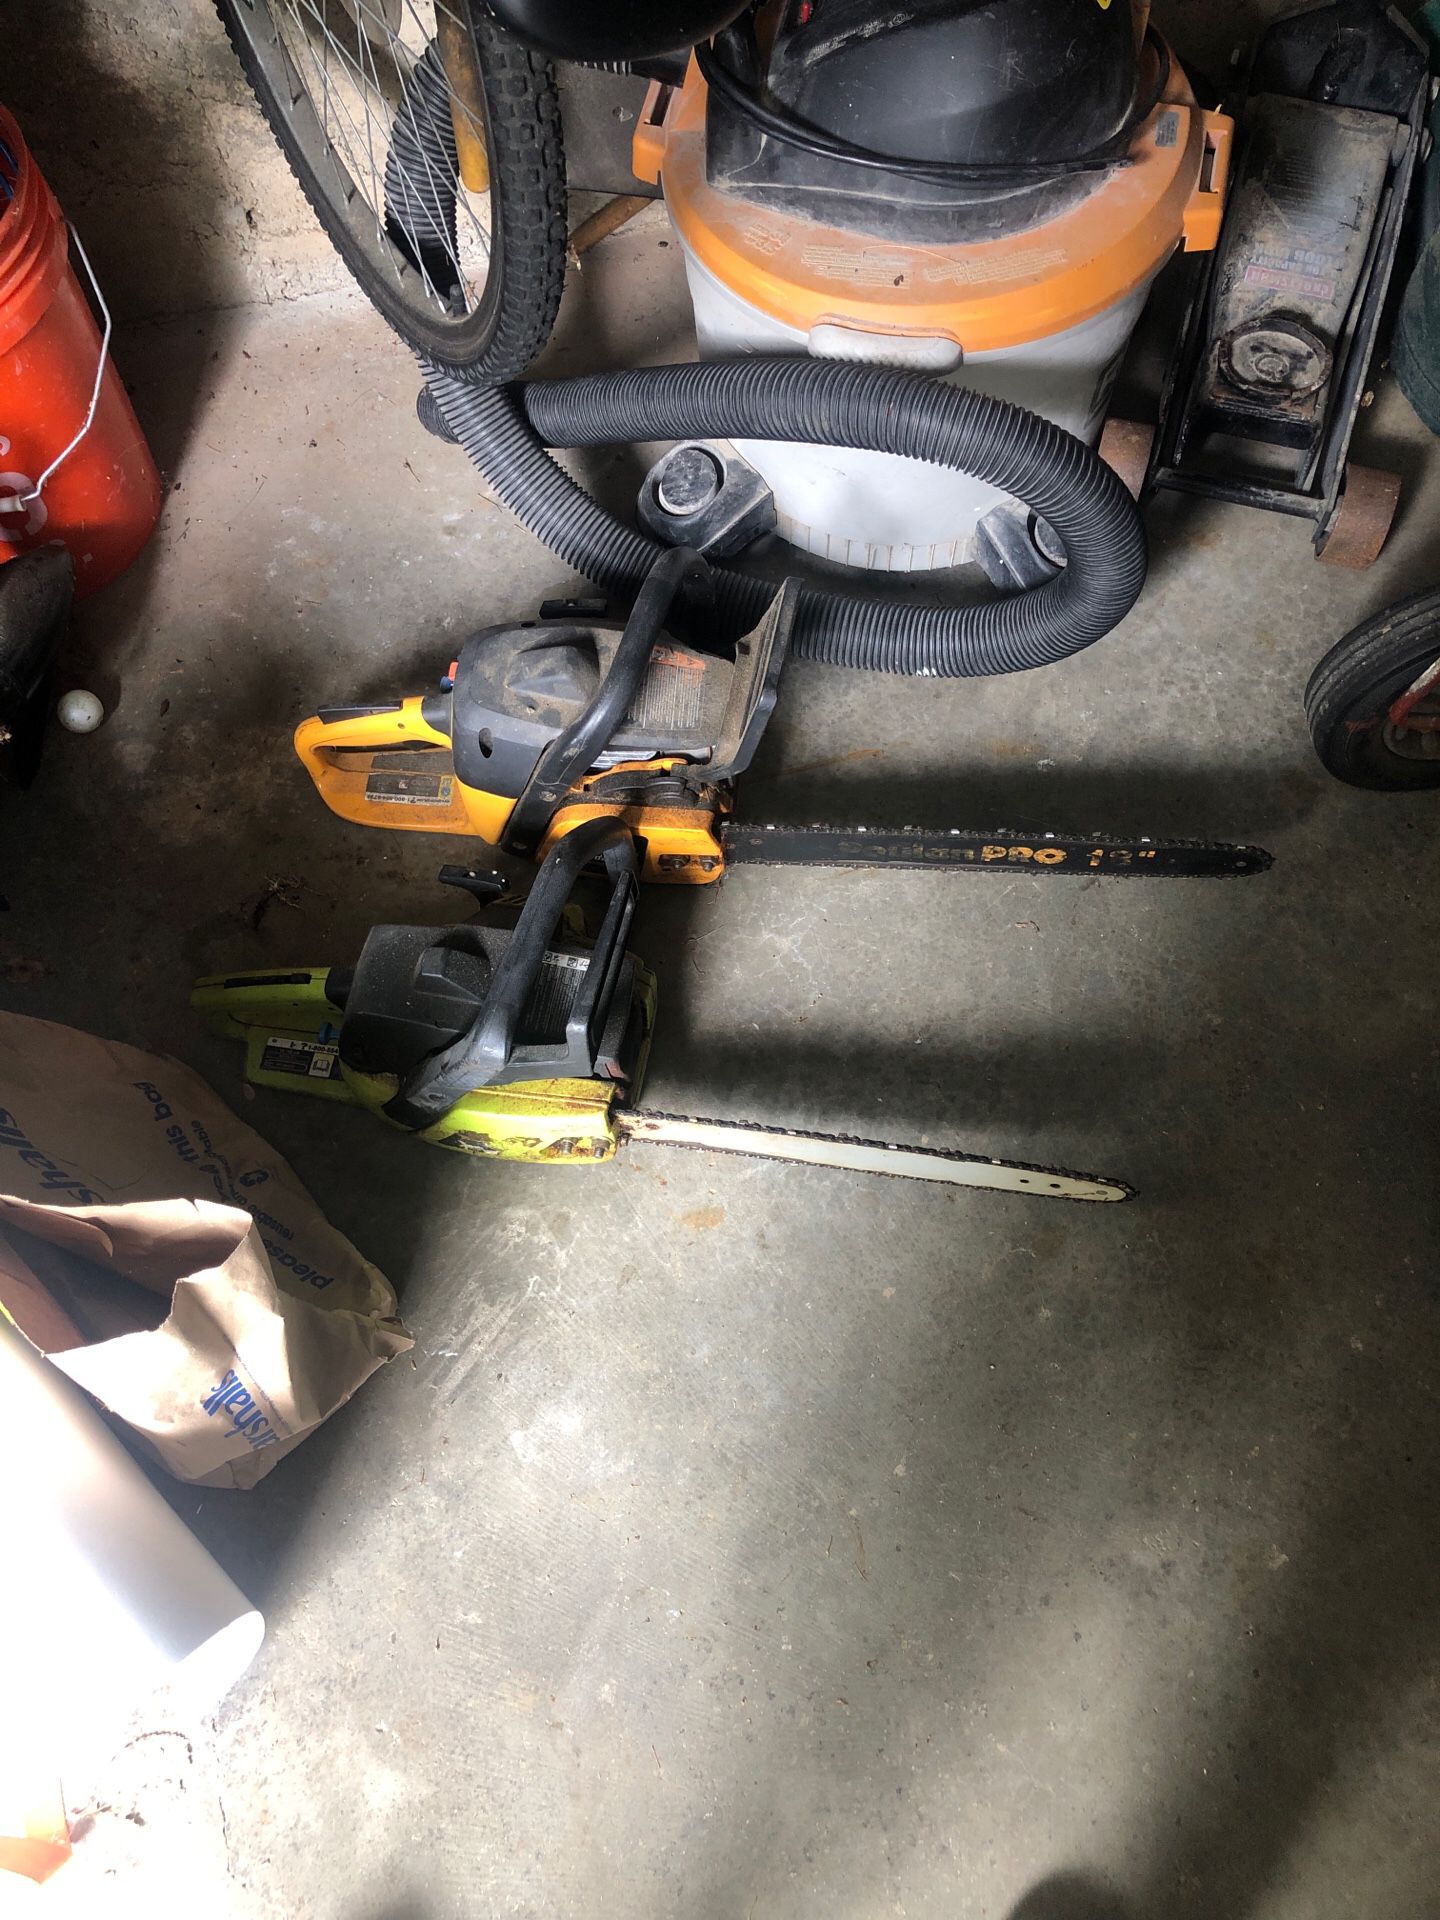 2 Poulan pro chainsaw. Both non working. Take them both for 20